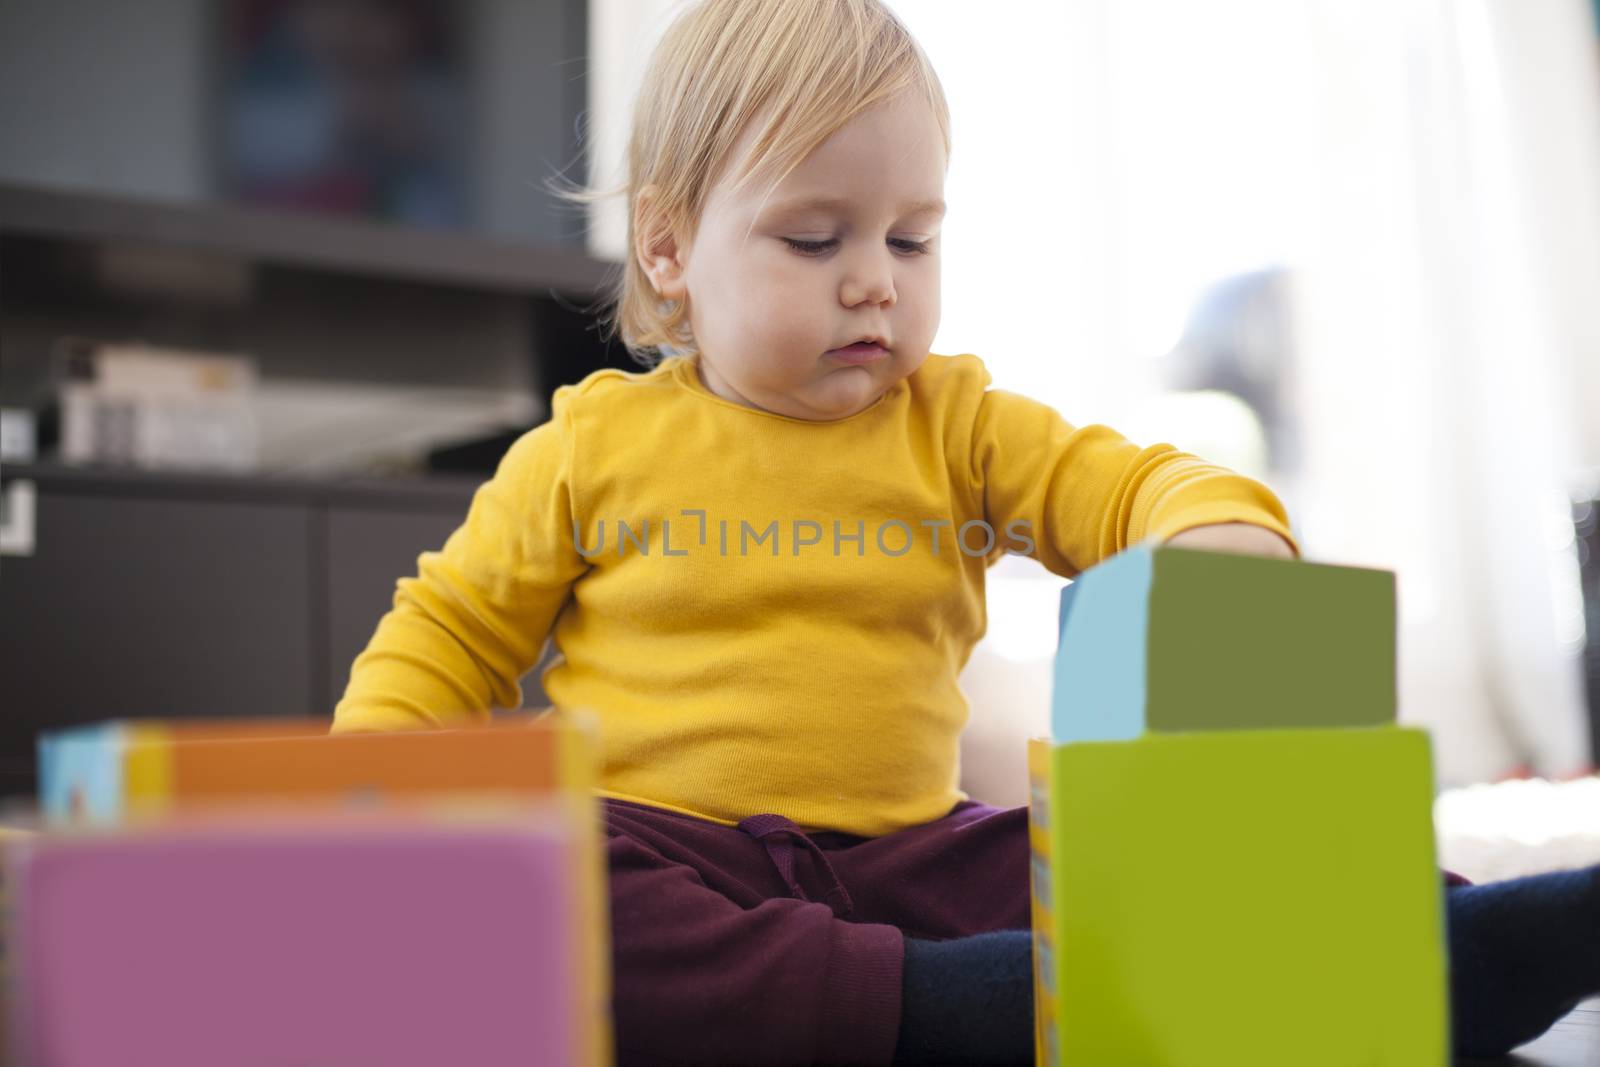 yellow sweater baby placing boxes by quintanilla